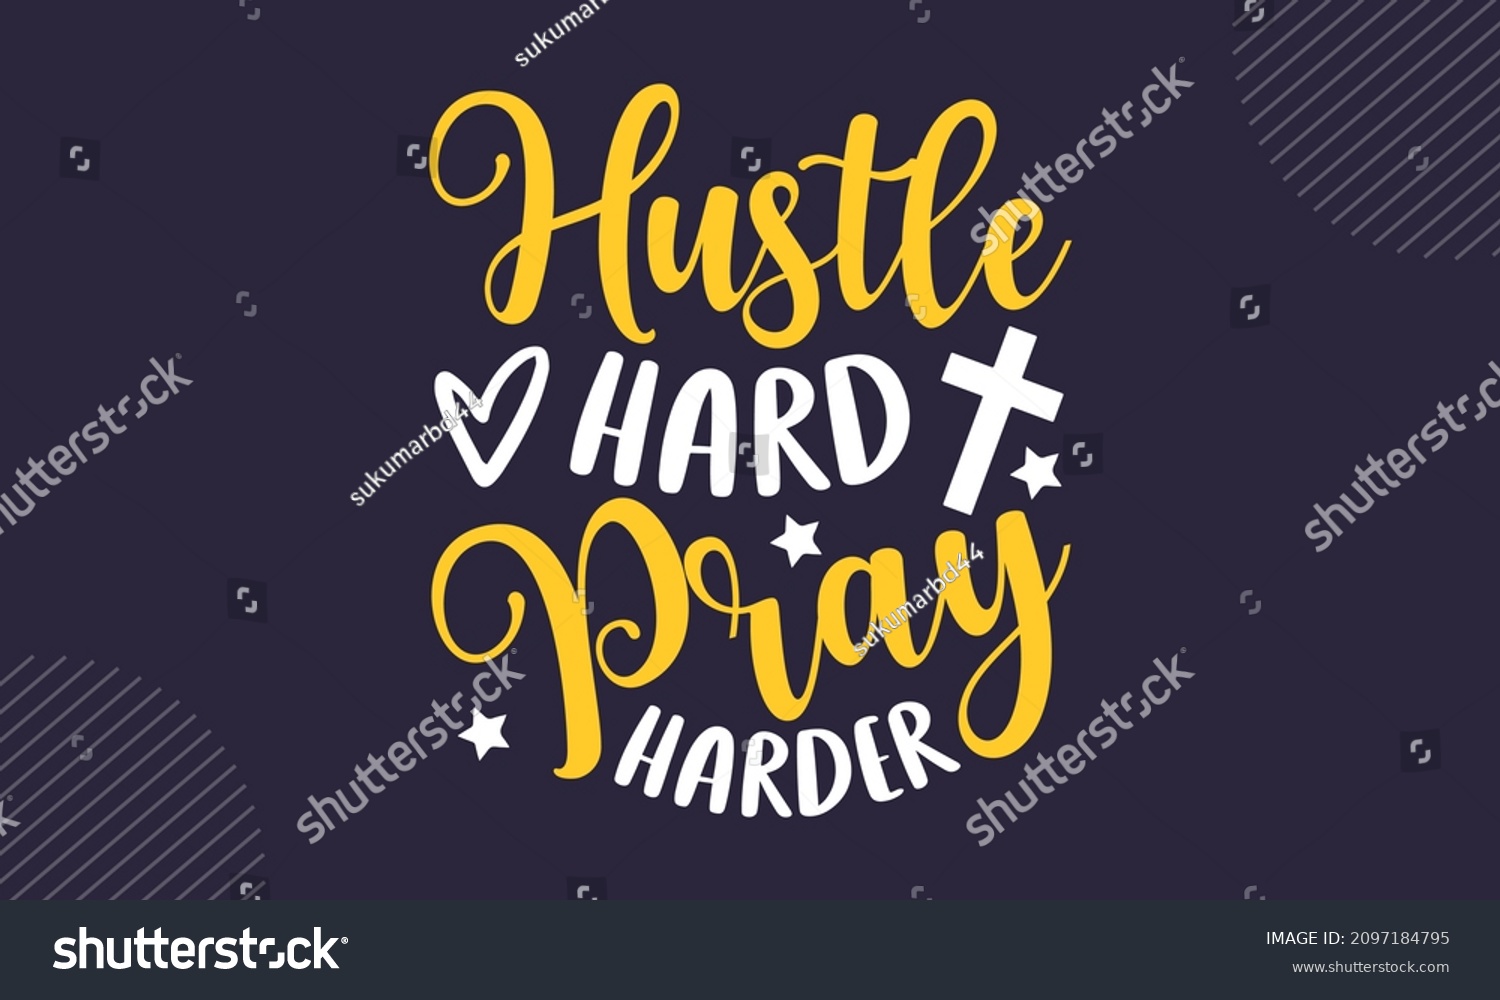 SVG of Hustle hard pray harder - Christian Easter t shirt design, svg Files for Cutting Cricut and Silhouette, card, Hand drawn lettering phrase, Calligraphy t shirt design, isolated on background svg